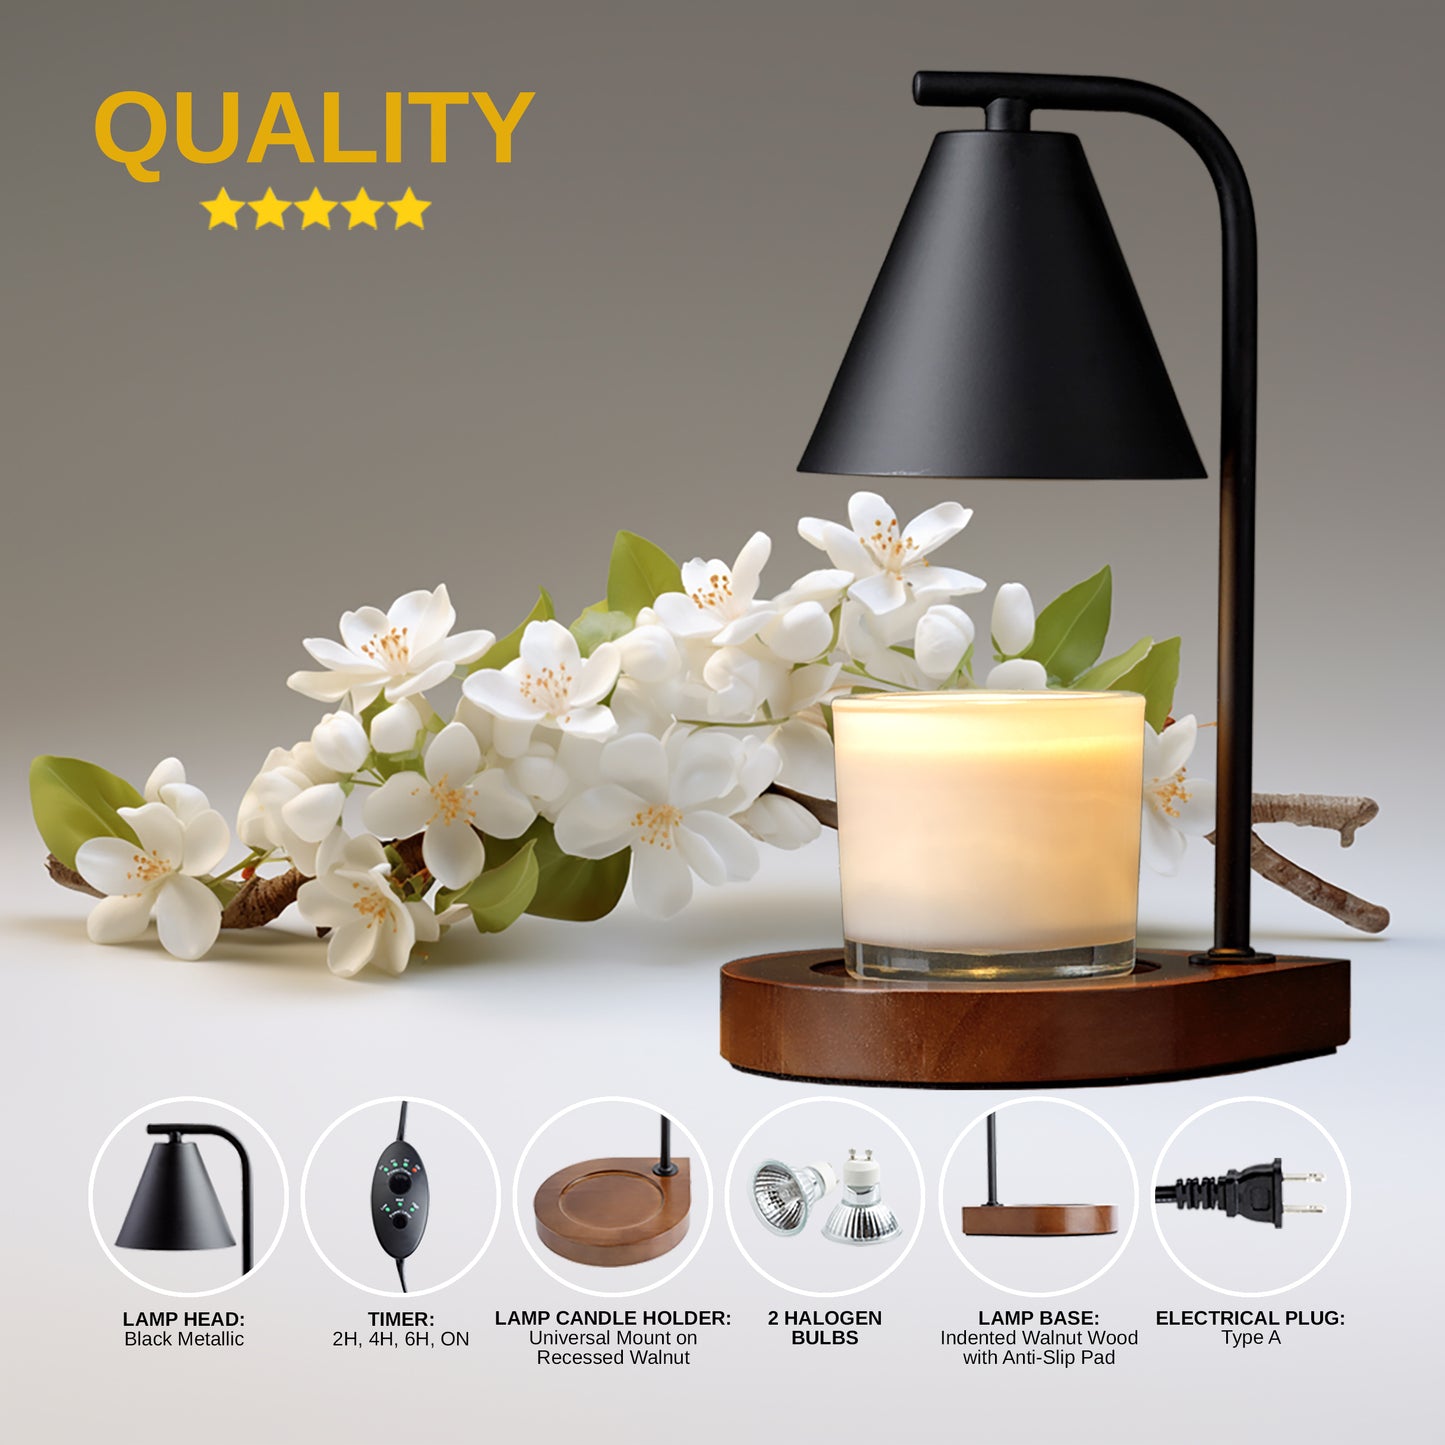 Embilights Smokeless Candle Wax Warmer Lamp - for Home Décor - Adjustable Dimmer and Timer Switch - Wooden Base & 2 Bulbs Included